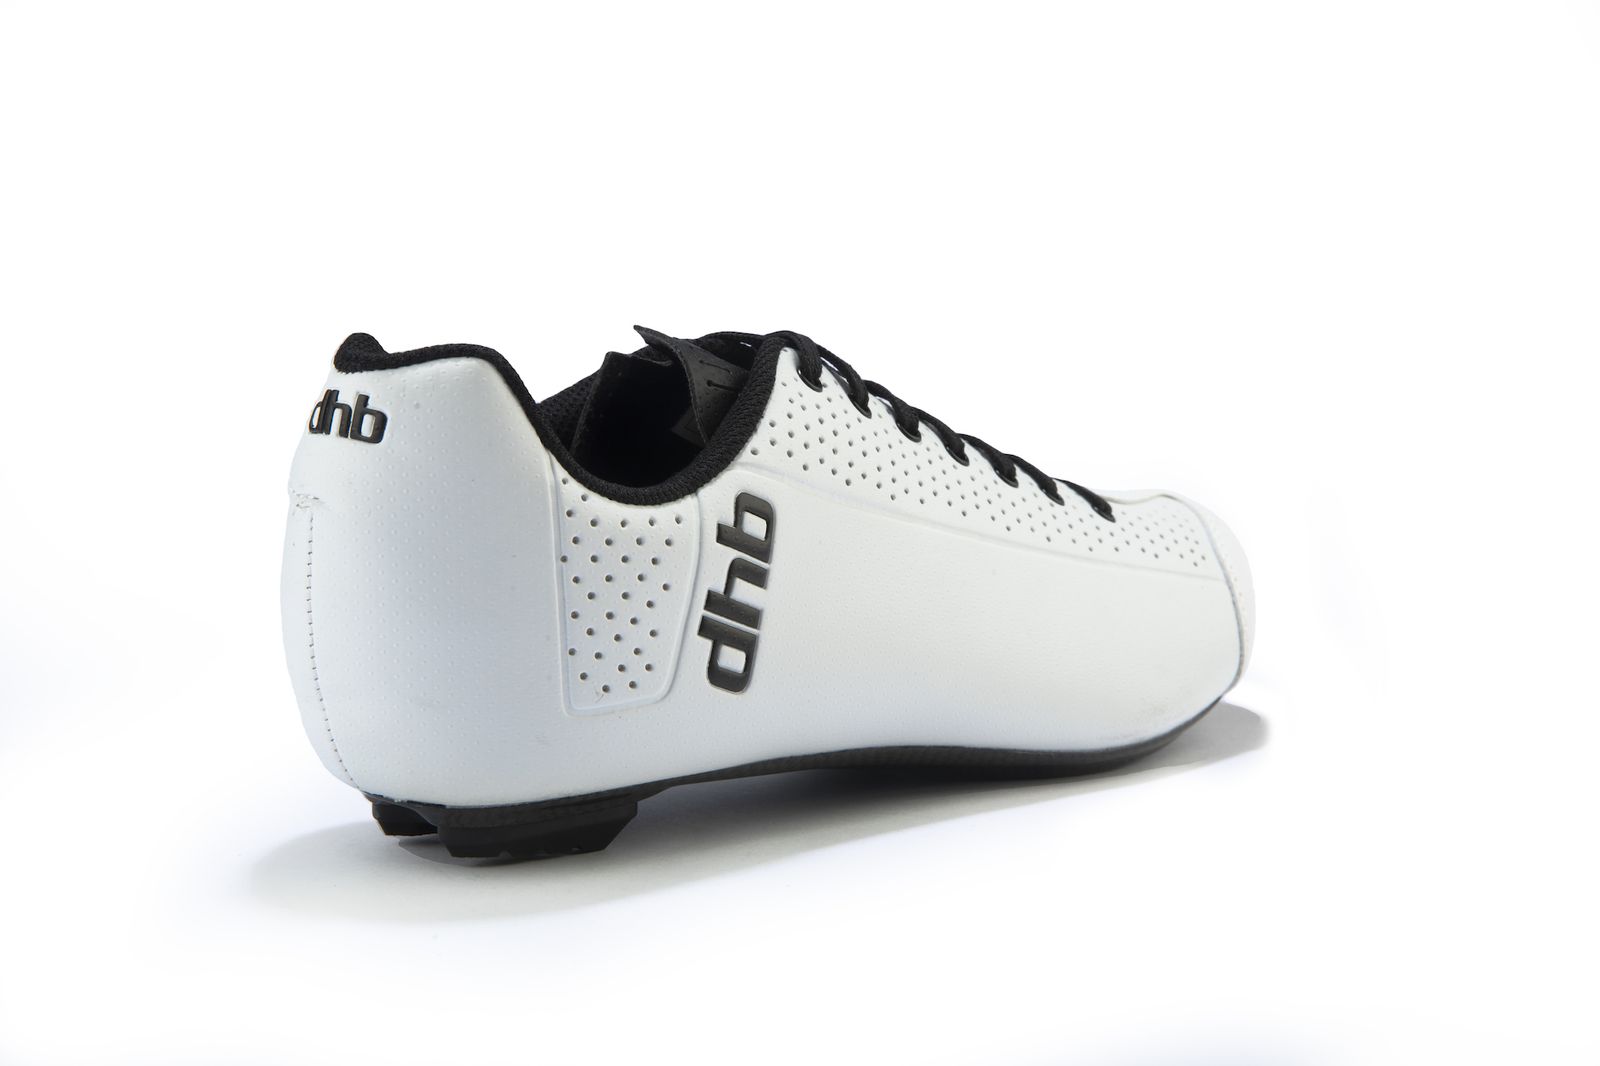 dhb Dorica Carbon cycling shoes review | Cycling Weekly